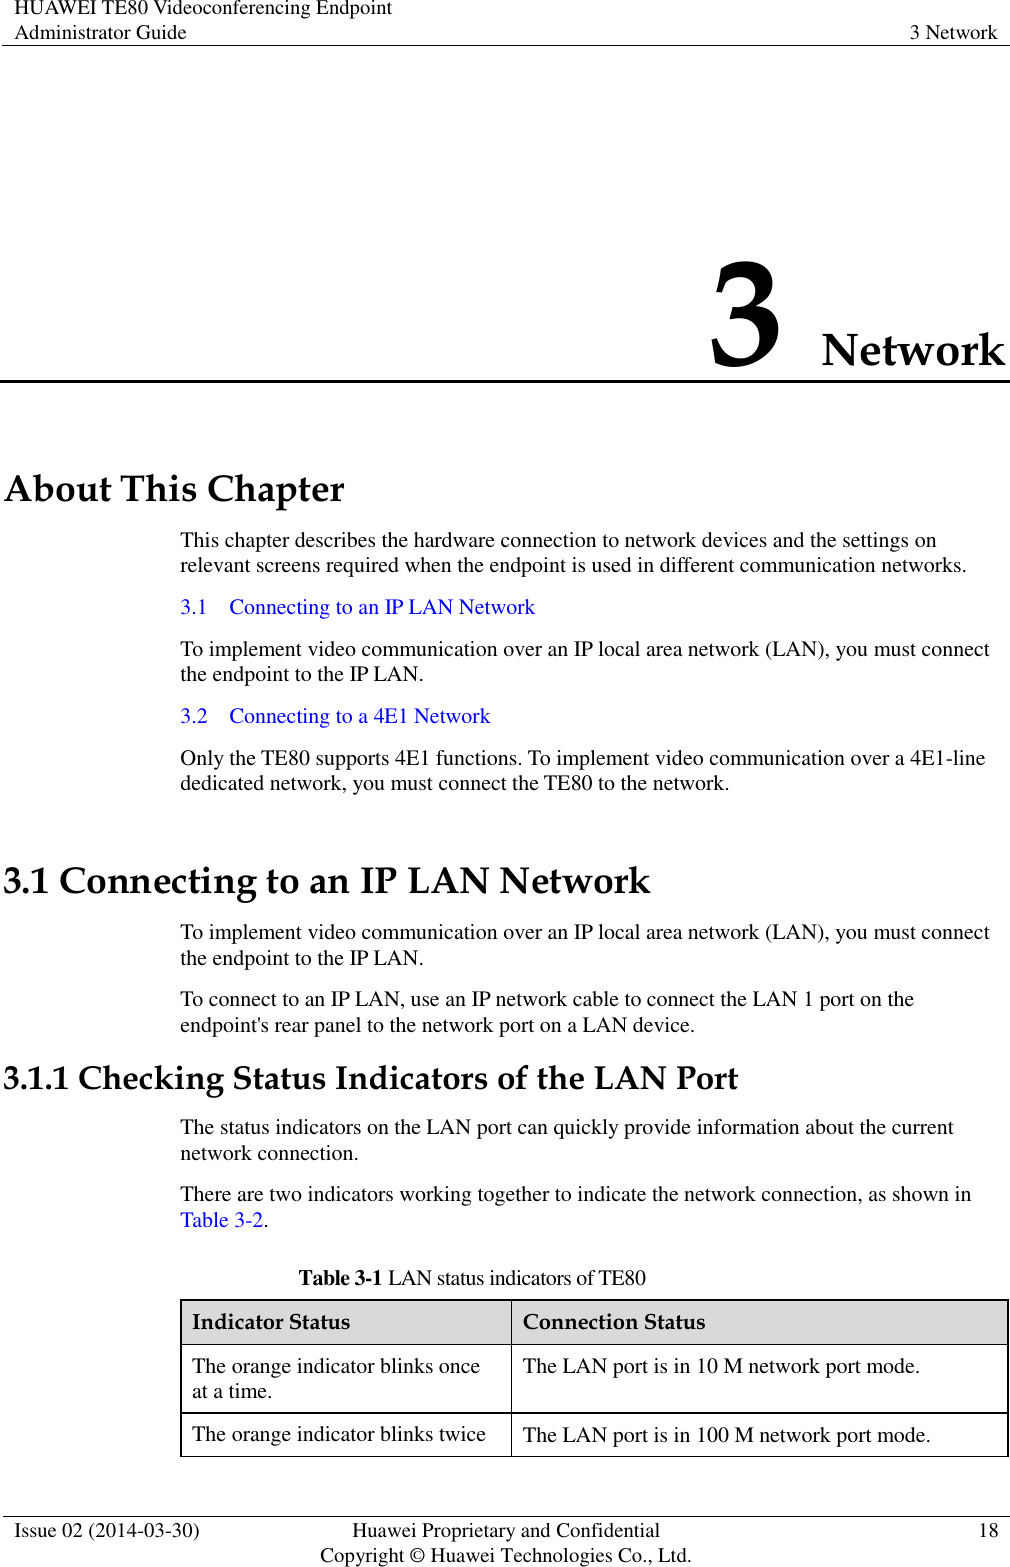 HUAWEI TE80 Videoconferencing Endpoint Administrator Guide 3 Network  Issue 02 (2014-03-30) Huawei Proprietary and Confidential Copyright © Huawei Technologies Co., Ltd. 18  3 Network About This Chapter This chapter describes the hardware connection to network devices and the settings on relevant screens required when the endpoint is used in different communication networks. 3.1    Connecting to an IP LAN Network To implement video communication over an IP local area network (LAN), you must connect the endpoint to the IP LAN. 3.2    Connecting to a 4E1 Network Only the TE80 supports 4E1 functions. To implement video communication over a 4E1-line dedicated network, you must connect the TE80 to the network. 3.1 Connecting to an IP LAN Network To implement video communication over an IP local area network (LAN), you must connect the endpoint to the IP LAN. To connect to an IP LAN, use an IP network cable to connect the LAN 1 port on the endpoint&apos;s rear panel to the network port on a LAN device. 3.1.1 Checking Status Indicators of the LAN Port The status indicators on the LAN port can quickly provide information about the current network connection. There are two indicators working together to indicate the network connection, as shown in Table 3-2. Table 3-1 LAN status indicators of TE80 Indicator Status Connection Status The orange indicator blinks once at a time. The LAN port is in 10 M network port mode. The orange indicator blinks twice The LAN port is in 100 M network port mode. 